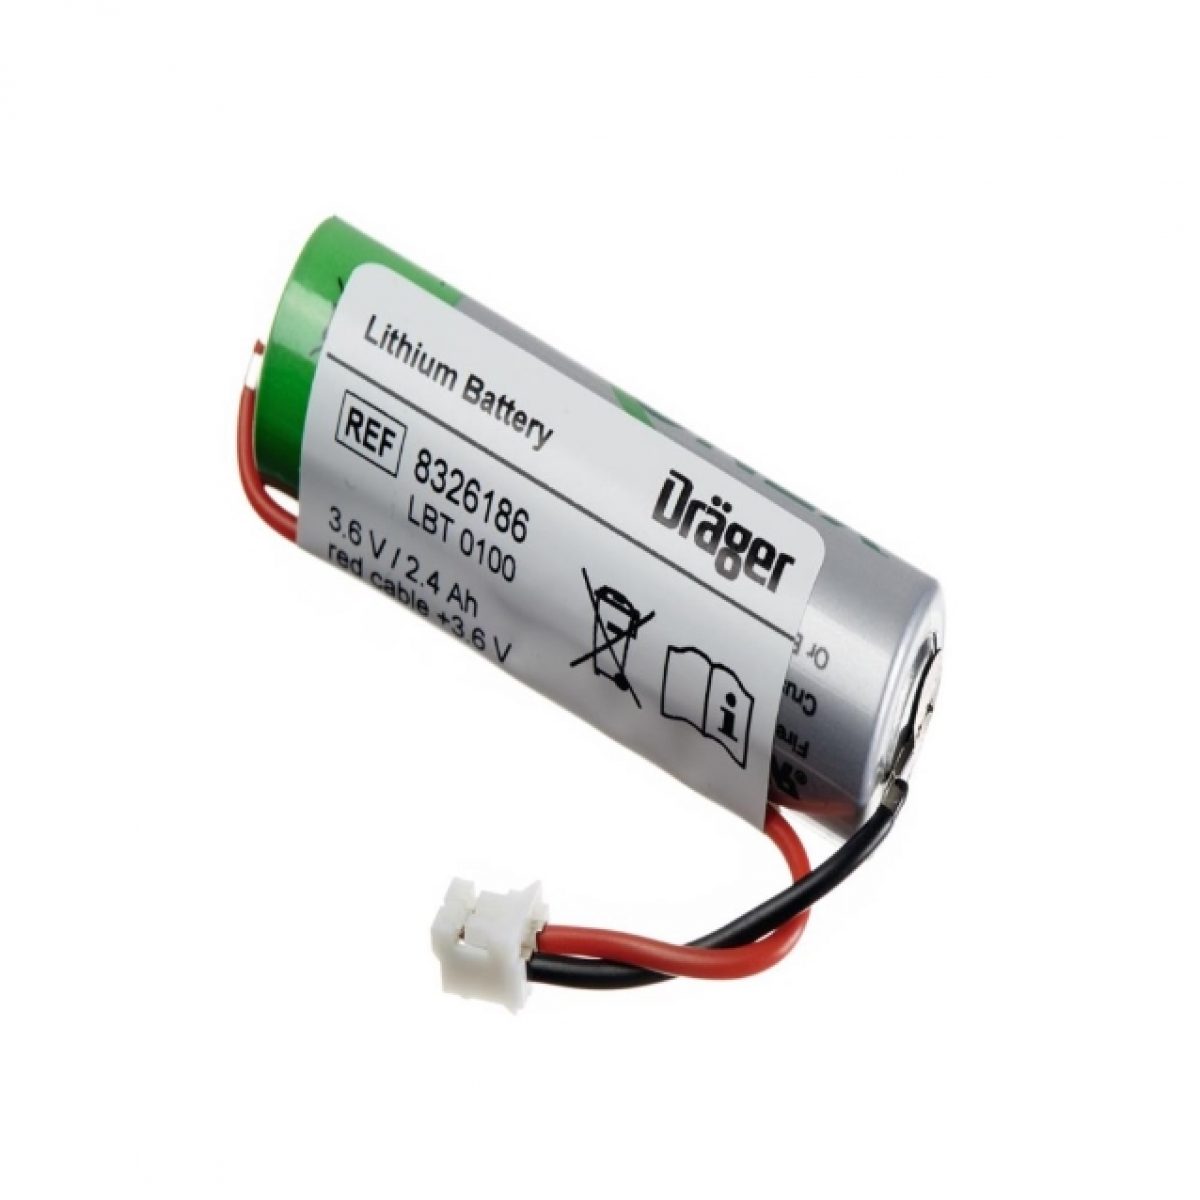 energup 2Pack Li-ion Replacement 3.6V Battery for Black Decker